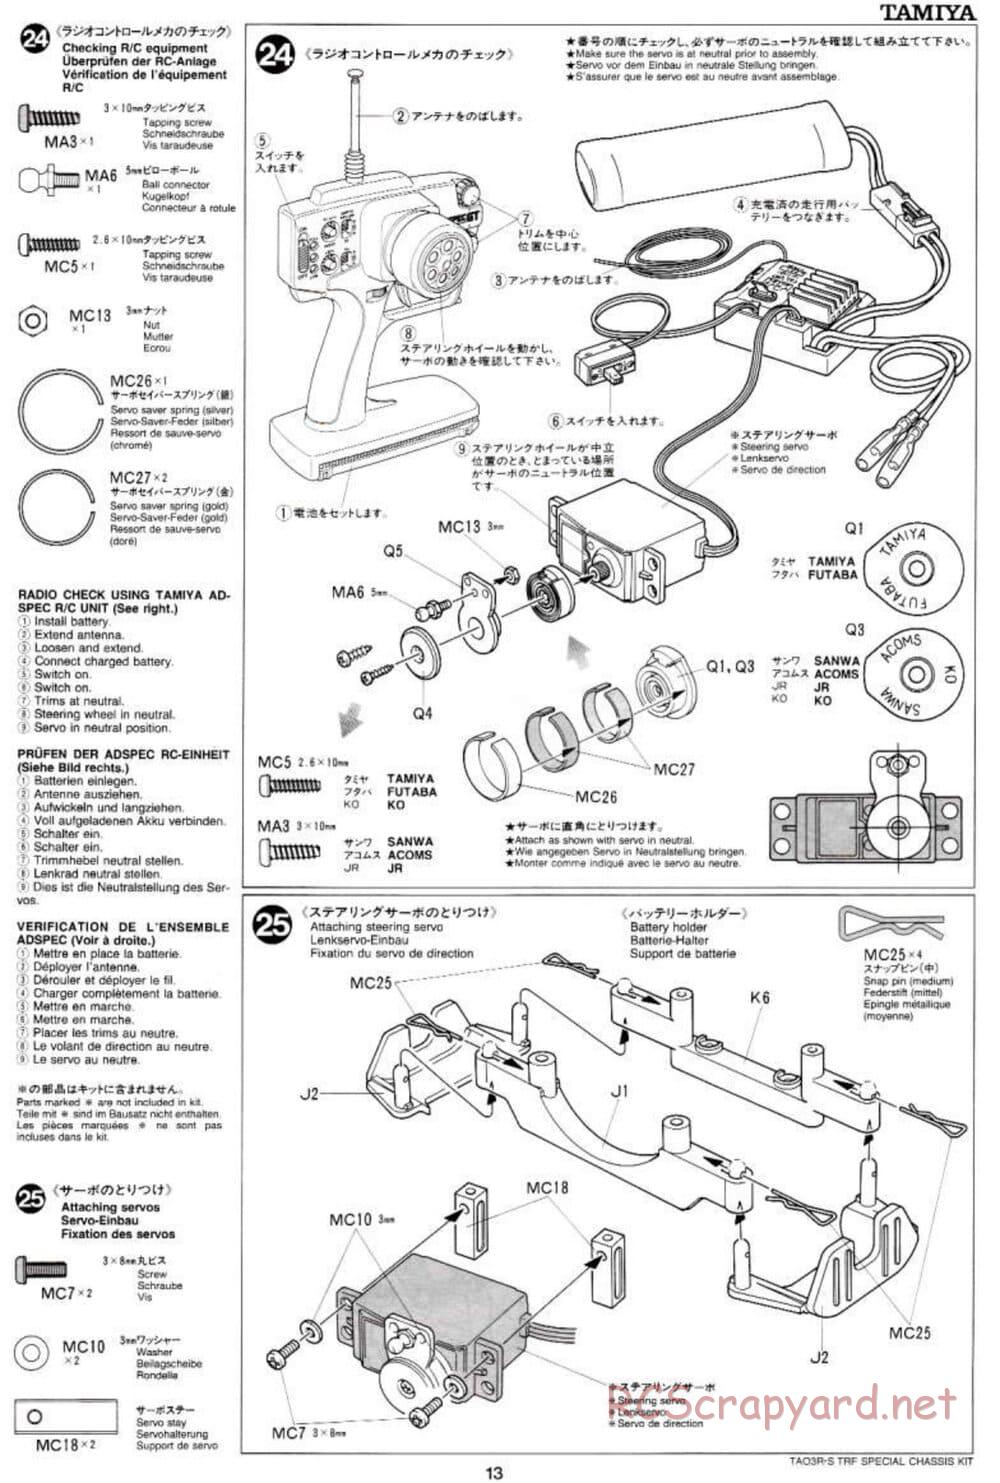 Tamiya - TA-03RS TRF Special Chassis - Manual - Page 13